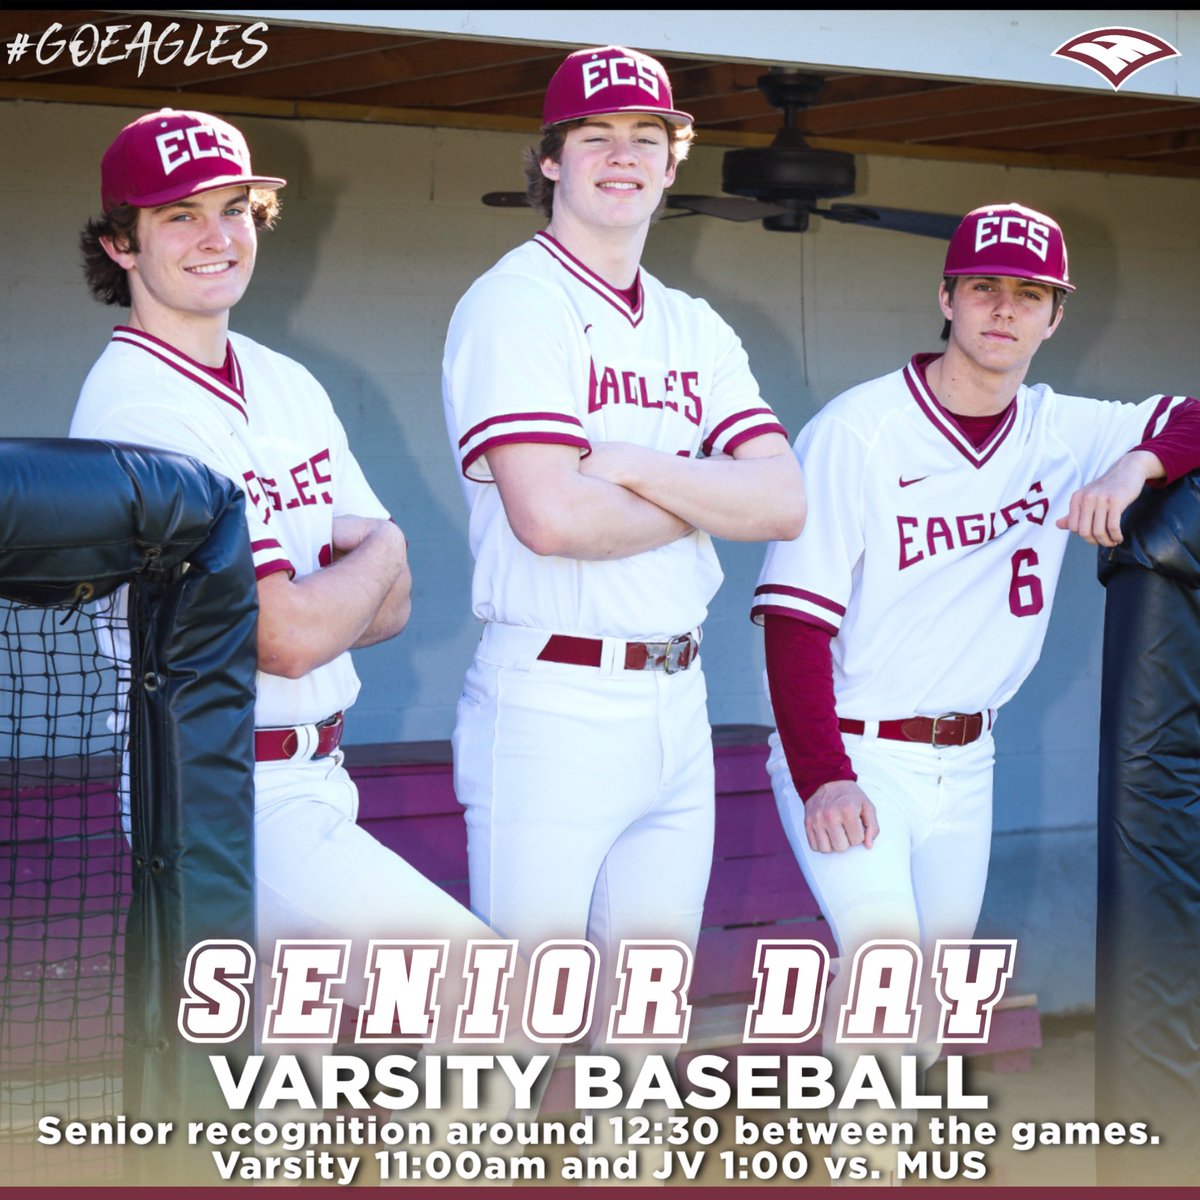 UPDATE!!! Another great reason to come out to the ballgames today…Senior Day! We will be recognizing Varsity Senior Baseball players today between the games. Approximate time is 12:30! #GoEagles